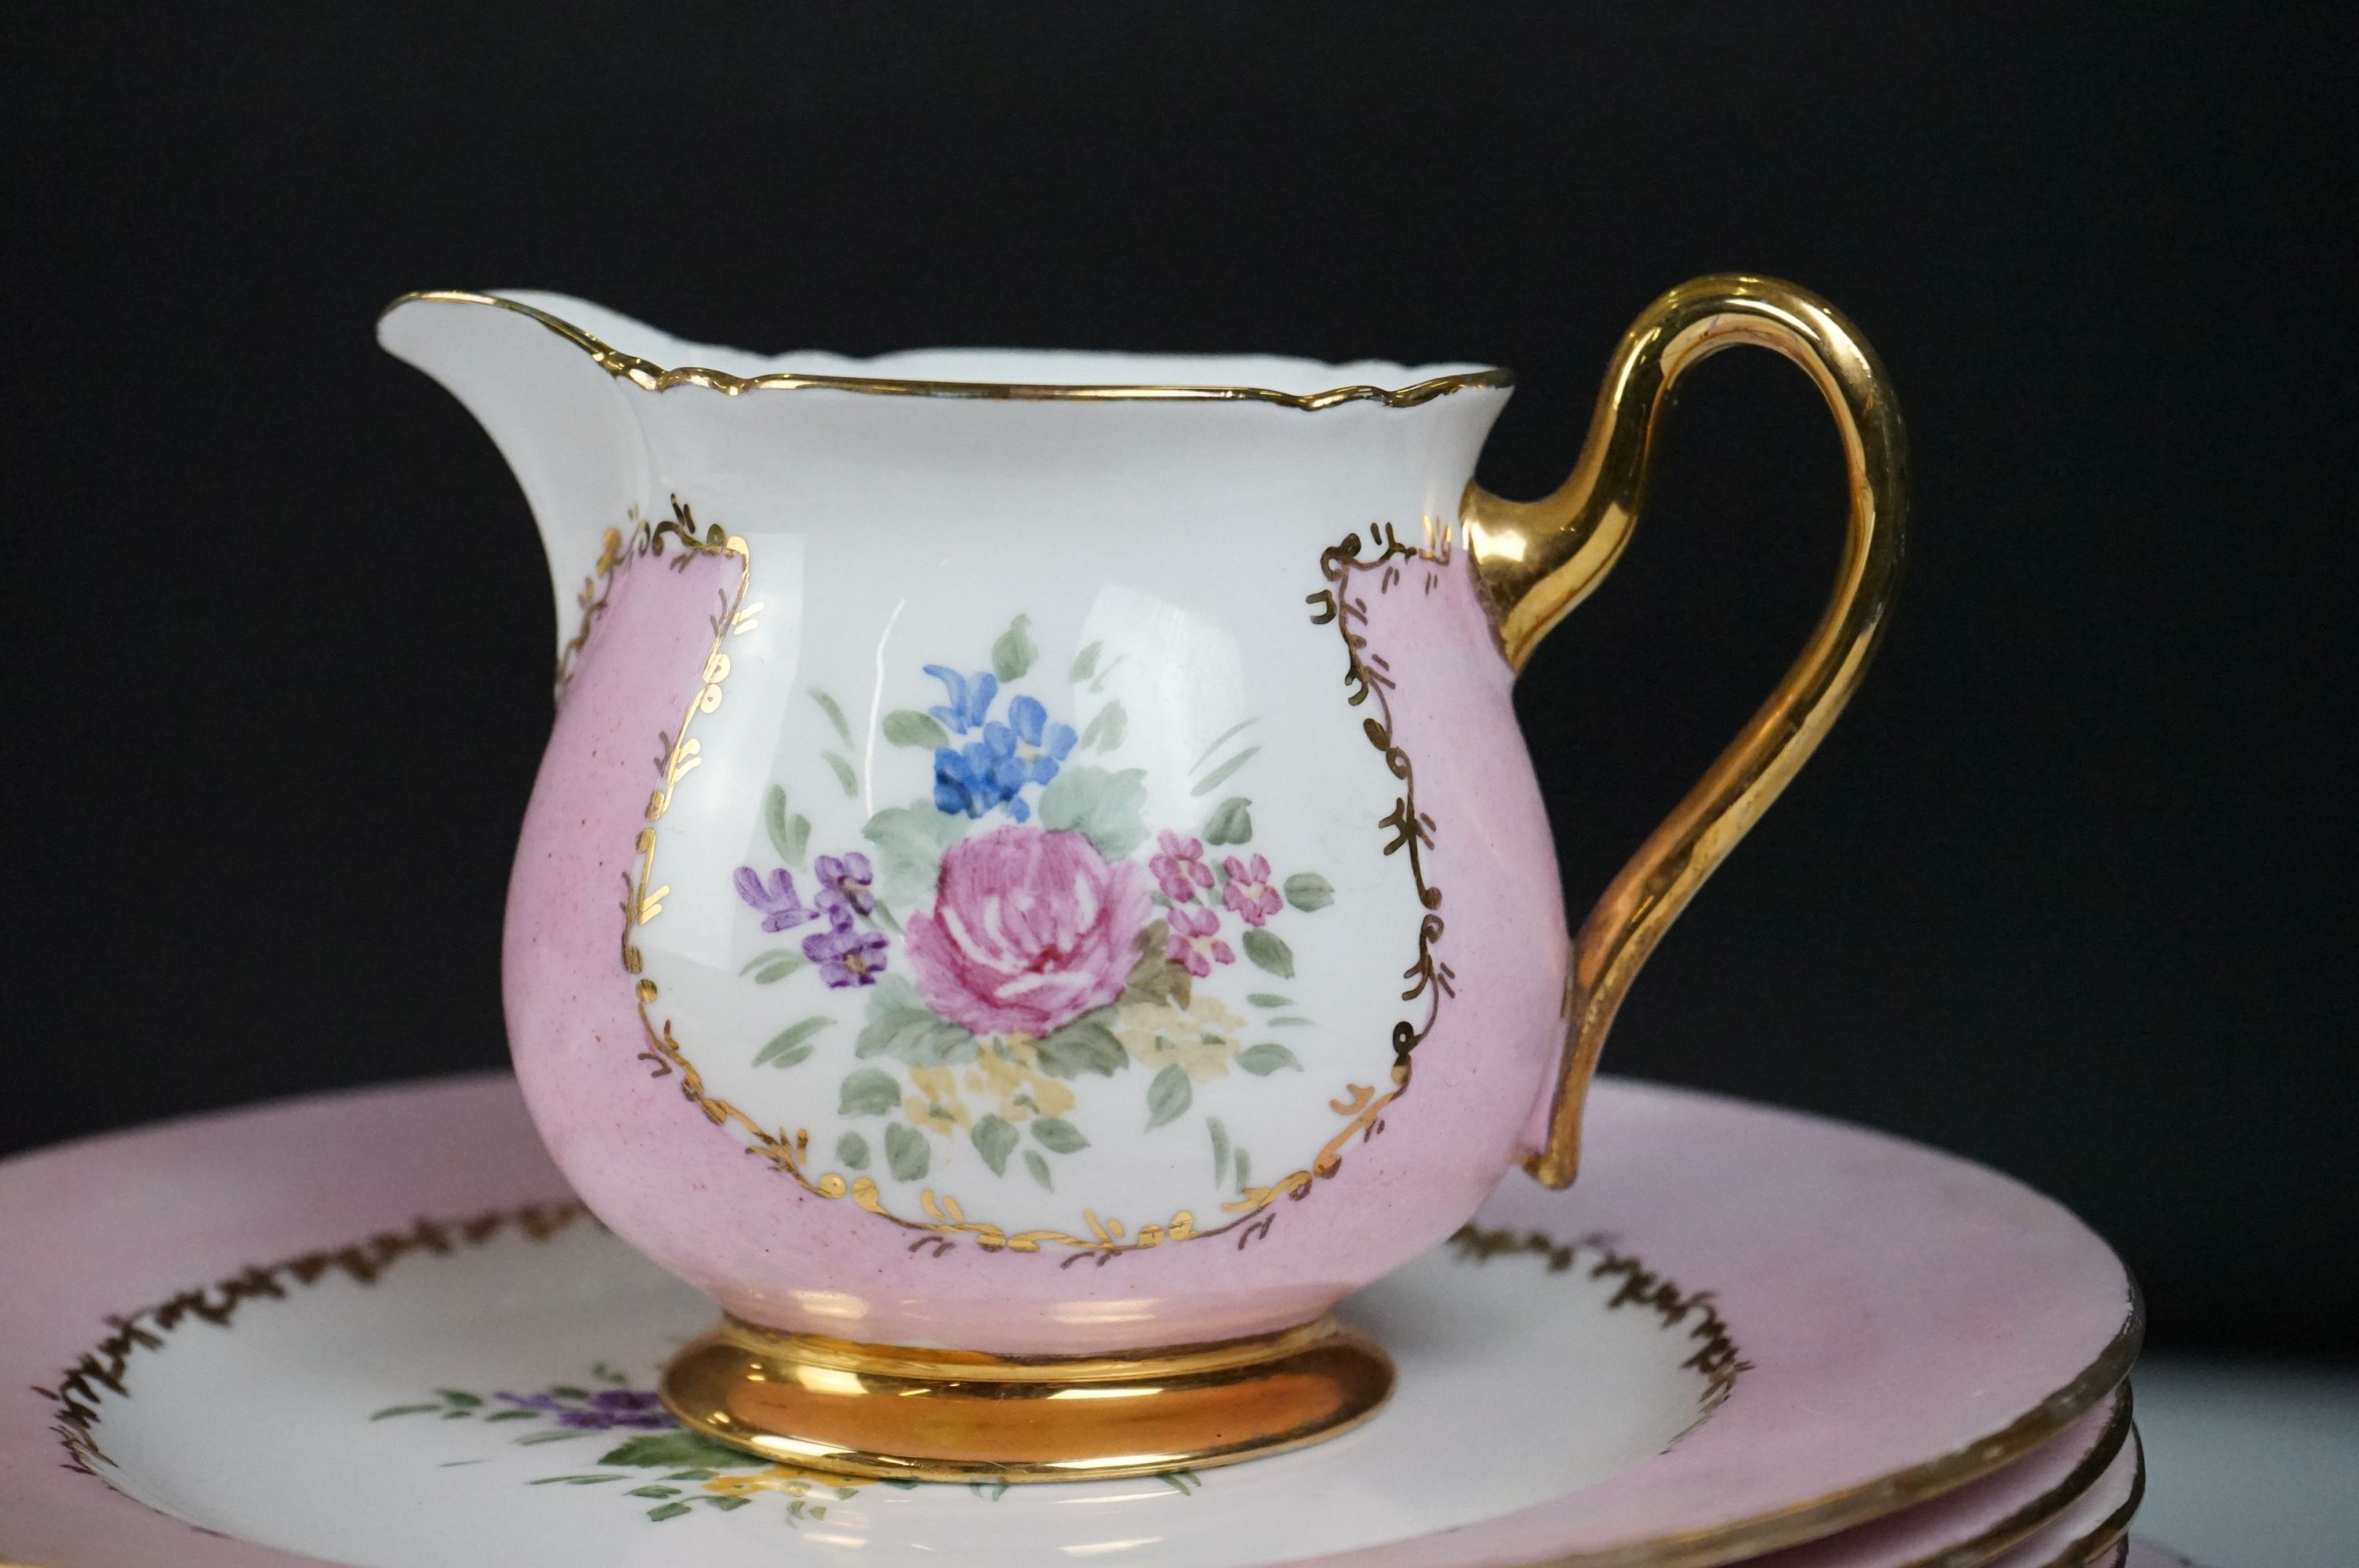 Early 20th Century Shelley hand painted floral tea ware on pink and white ground, with gilt - Image 9 of 12